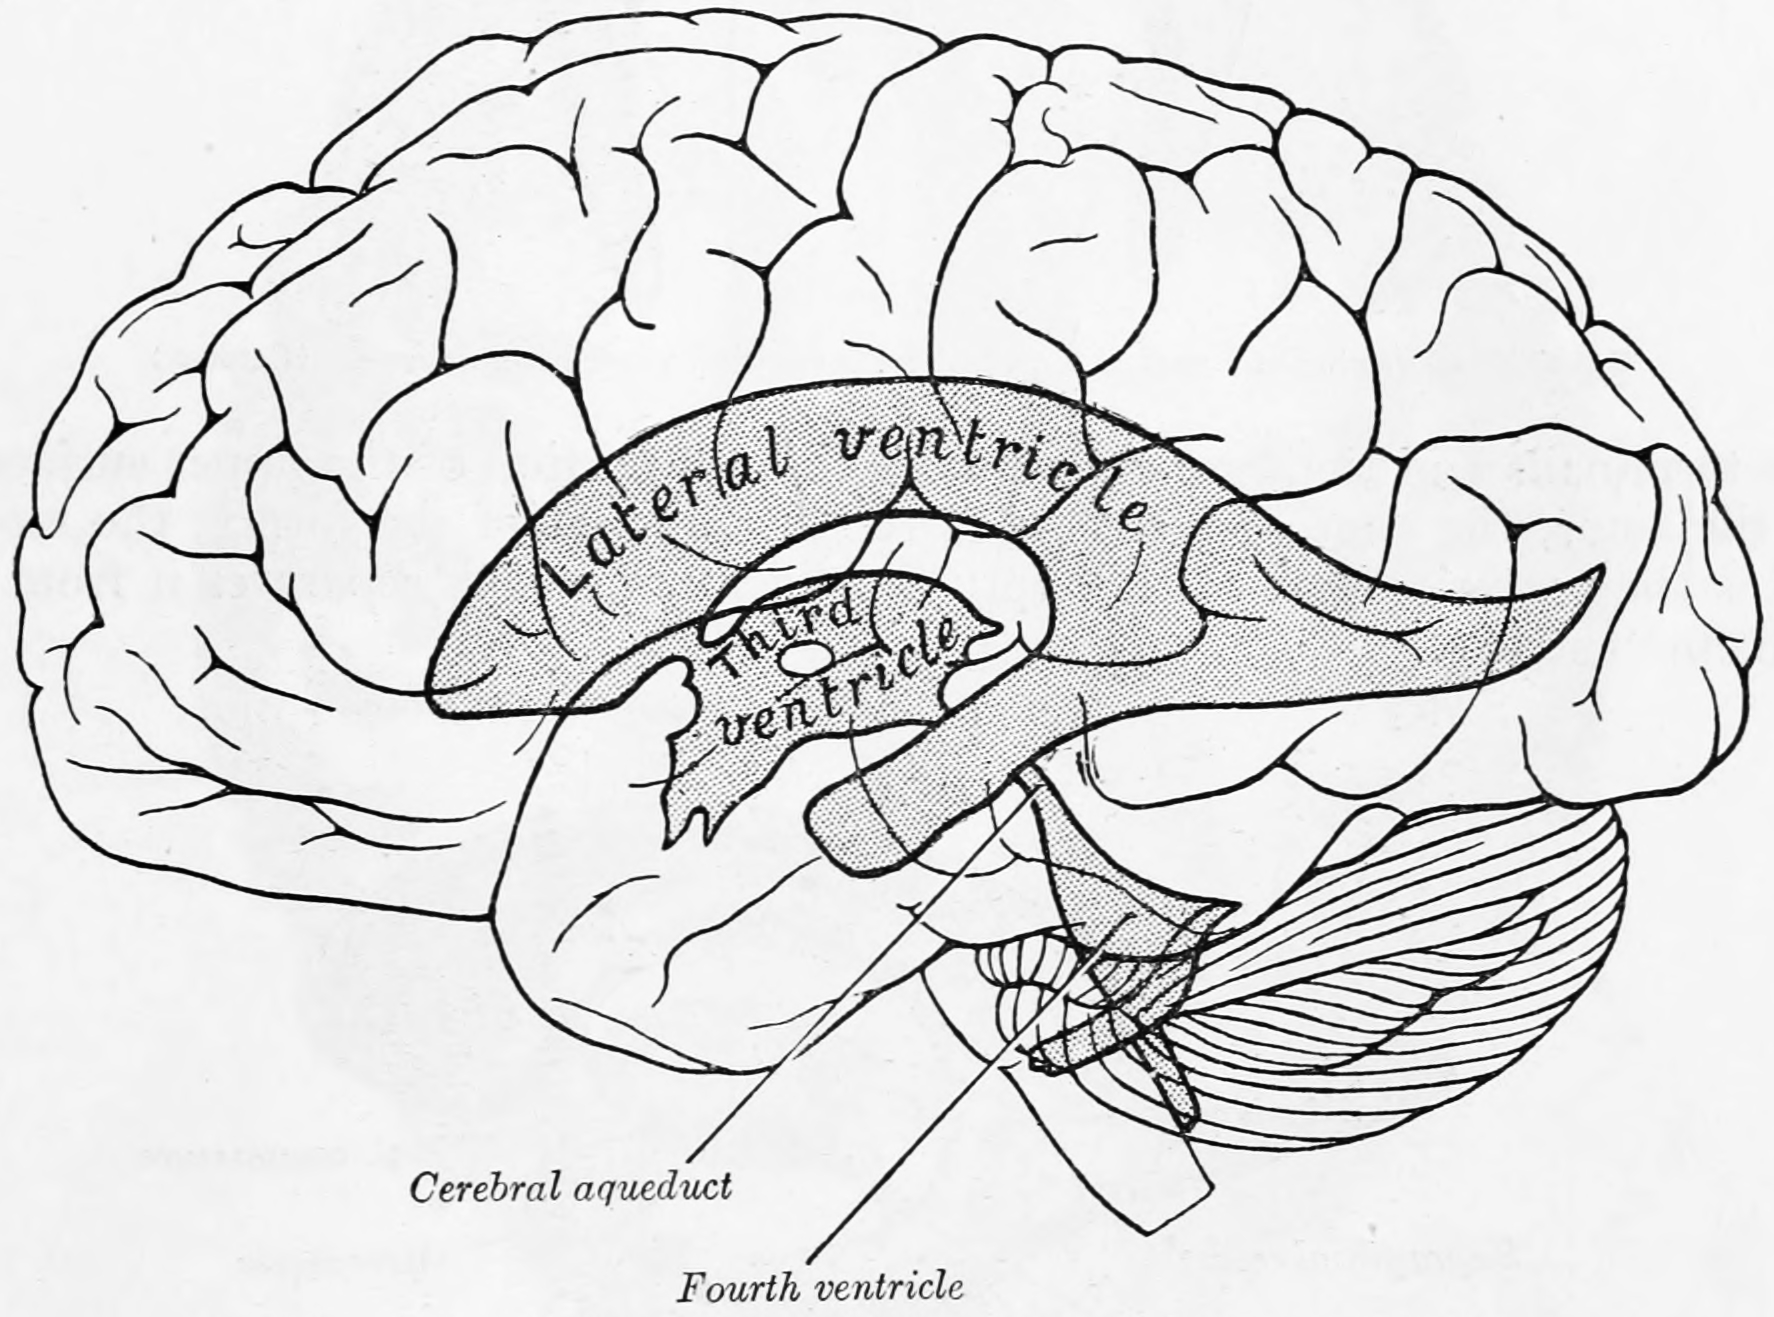 The ventricles in relation to the brain as seen through the left hemisphere. From Gray Henry, Anatomy of the Human Body. 20th Edition, Lea & Febiger, Philadelphia & New York, 1918